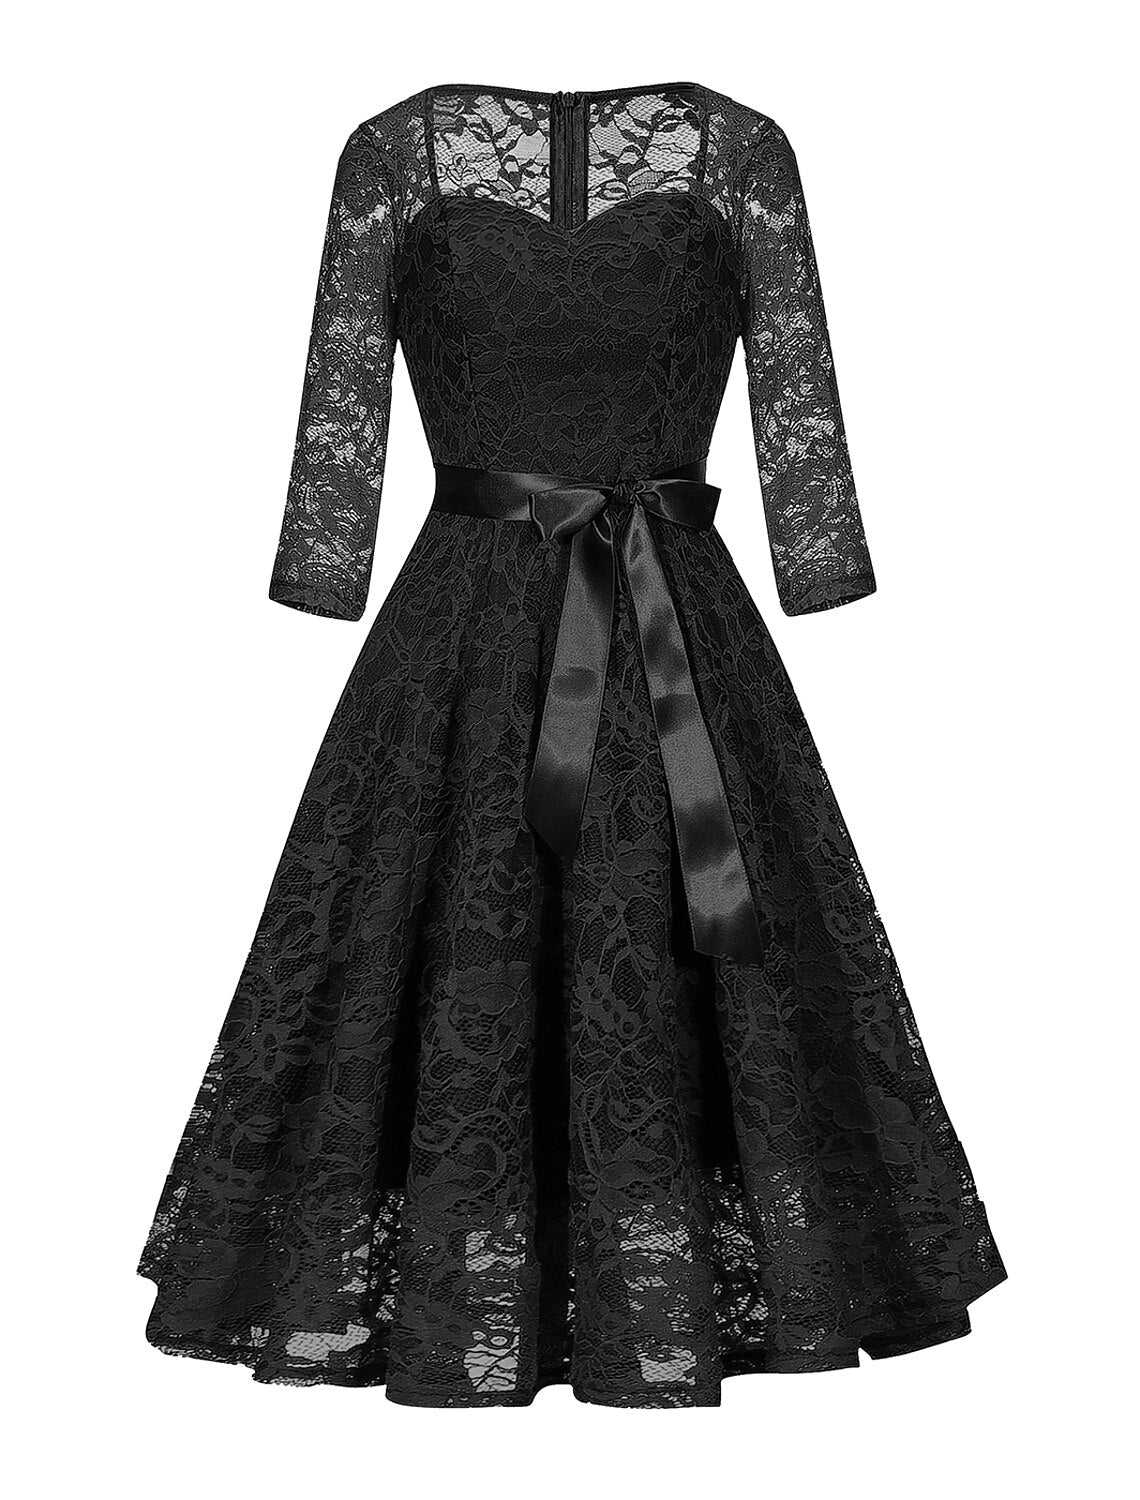 A-Line Cocktail Dresses Vintage Dress Party Wear Knee Length 3/4 Length Sleeve Square Neck Lace with Sleek Sash / Ribbon Pure Color